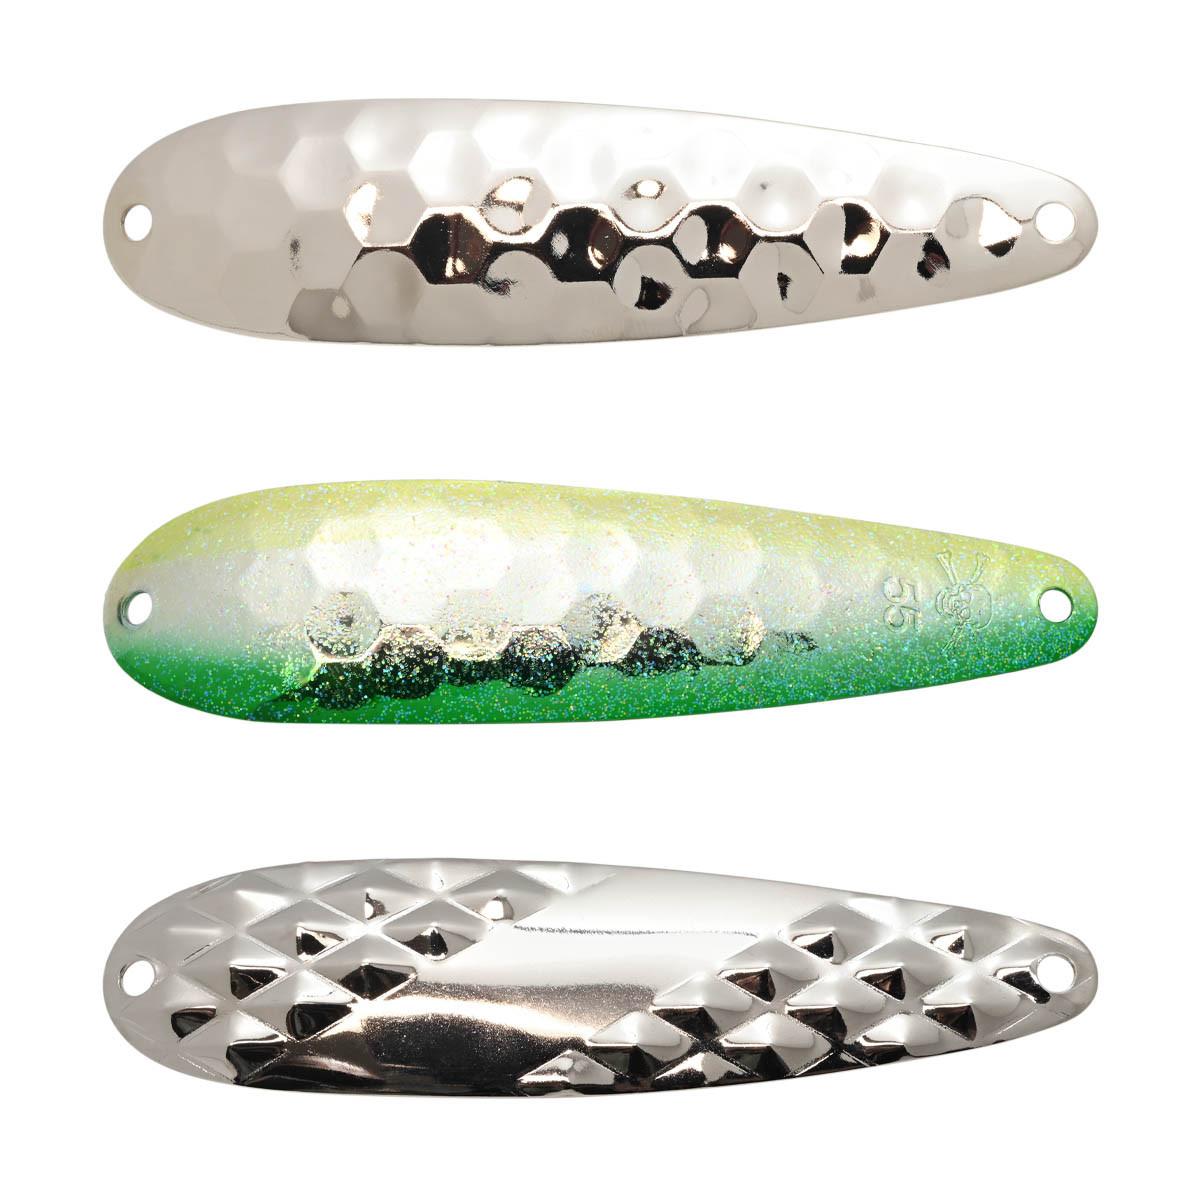 Details about   Spinn Craft Lures Crackle Spoon  Col#4 16g/65mm 